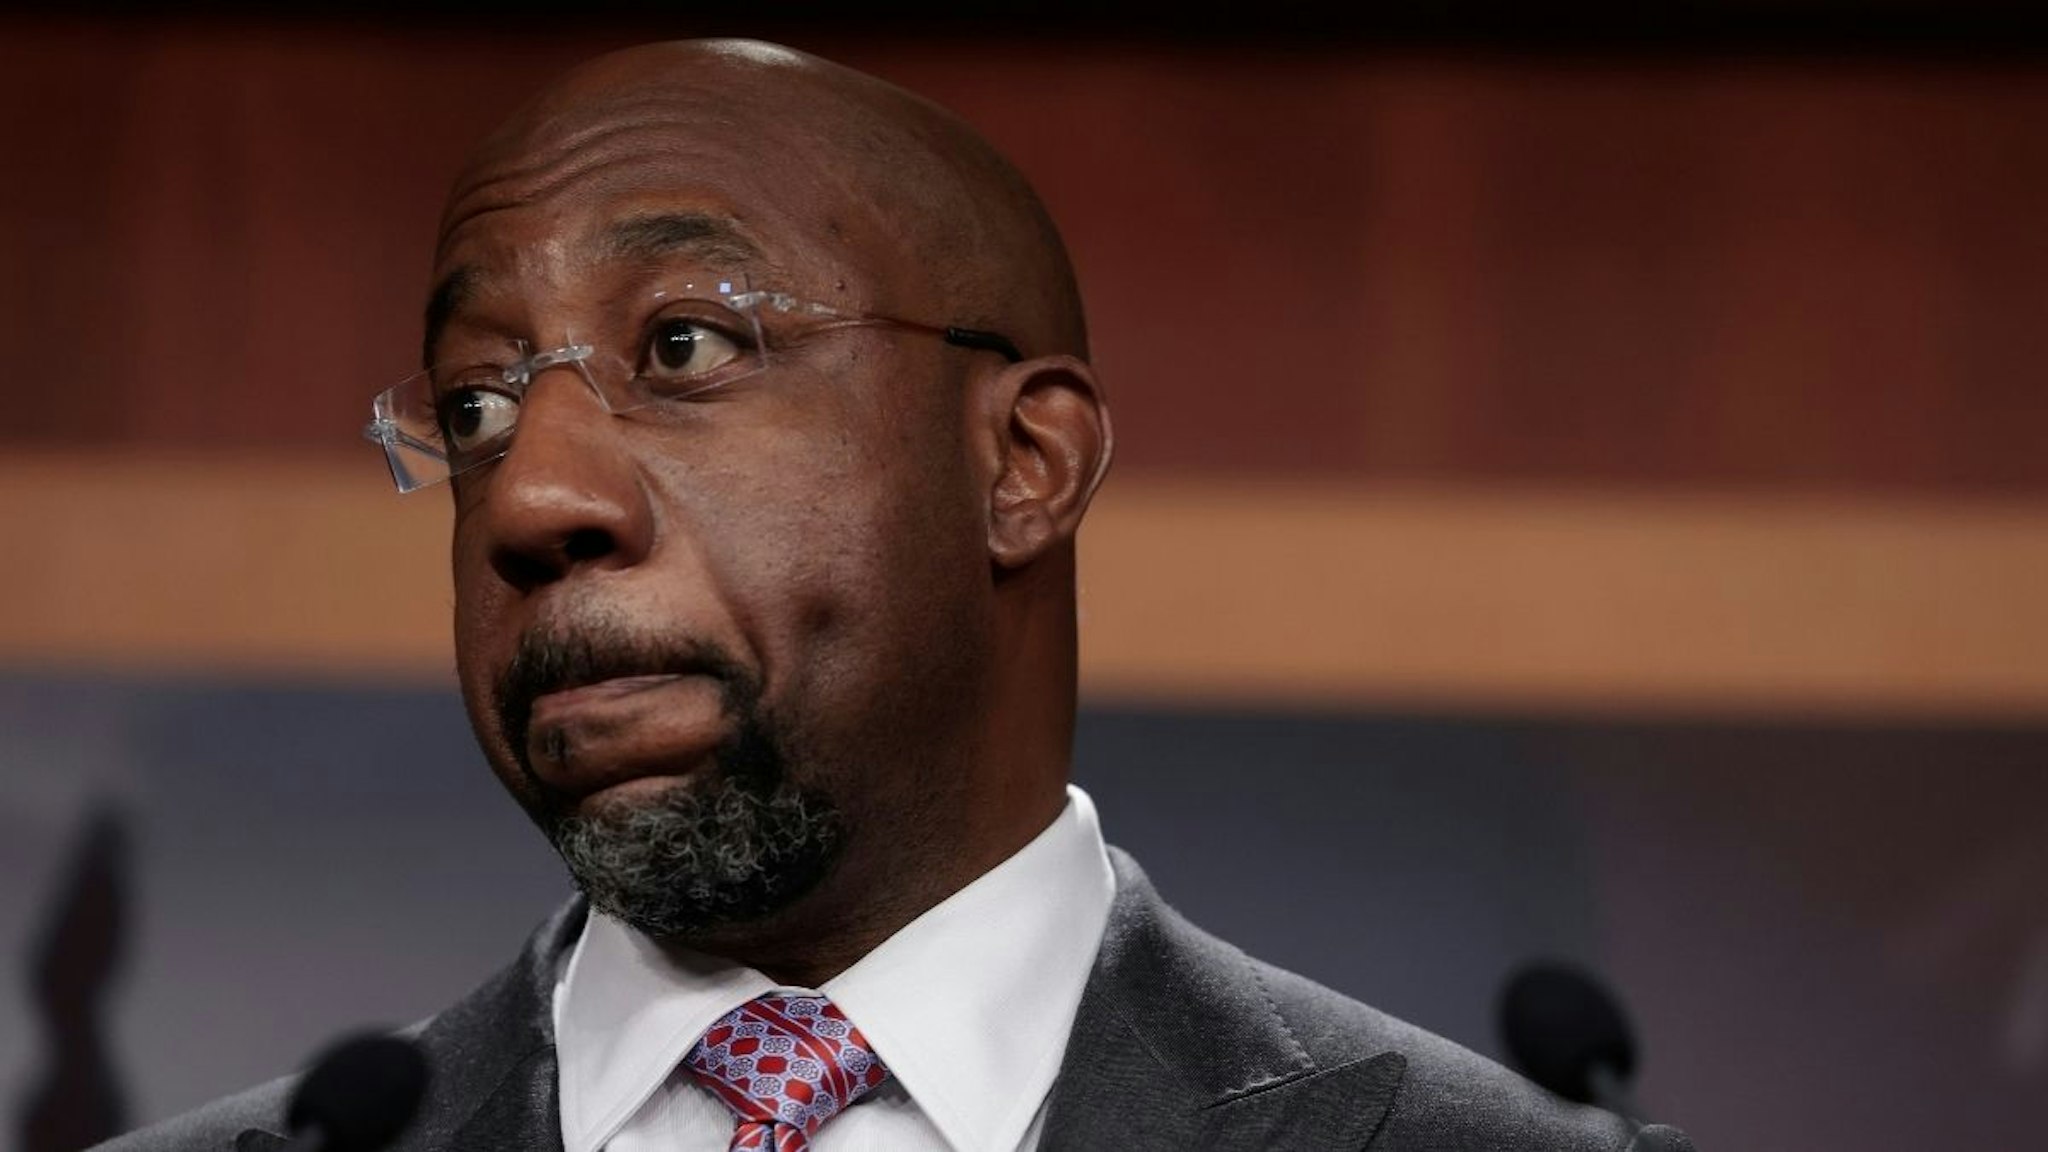 Sen. Raphael Warnock (D-GA) speaks at a news conference following a virtual weekly Senate Democratic Policy meeting at the U.S. Capitol Building on January 04, 2022 in Washington, DC.